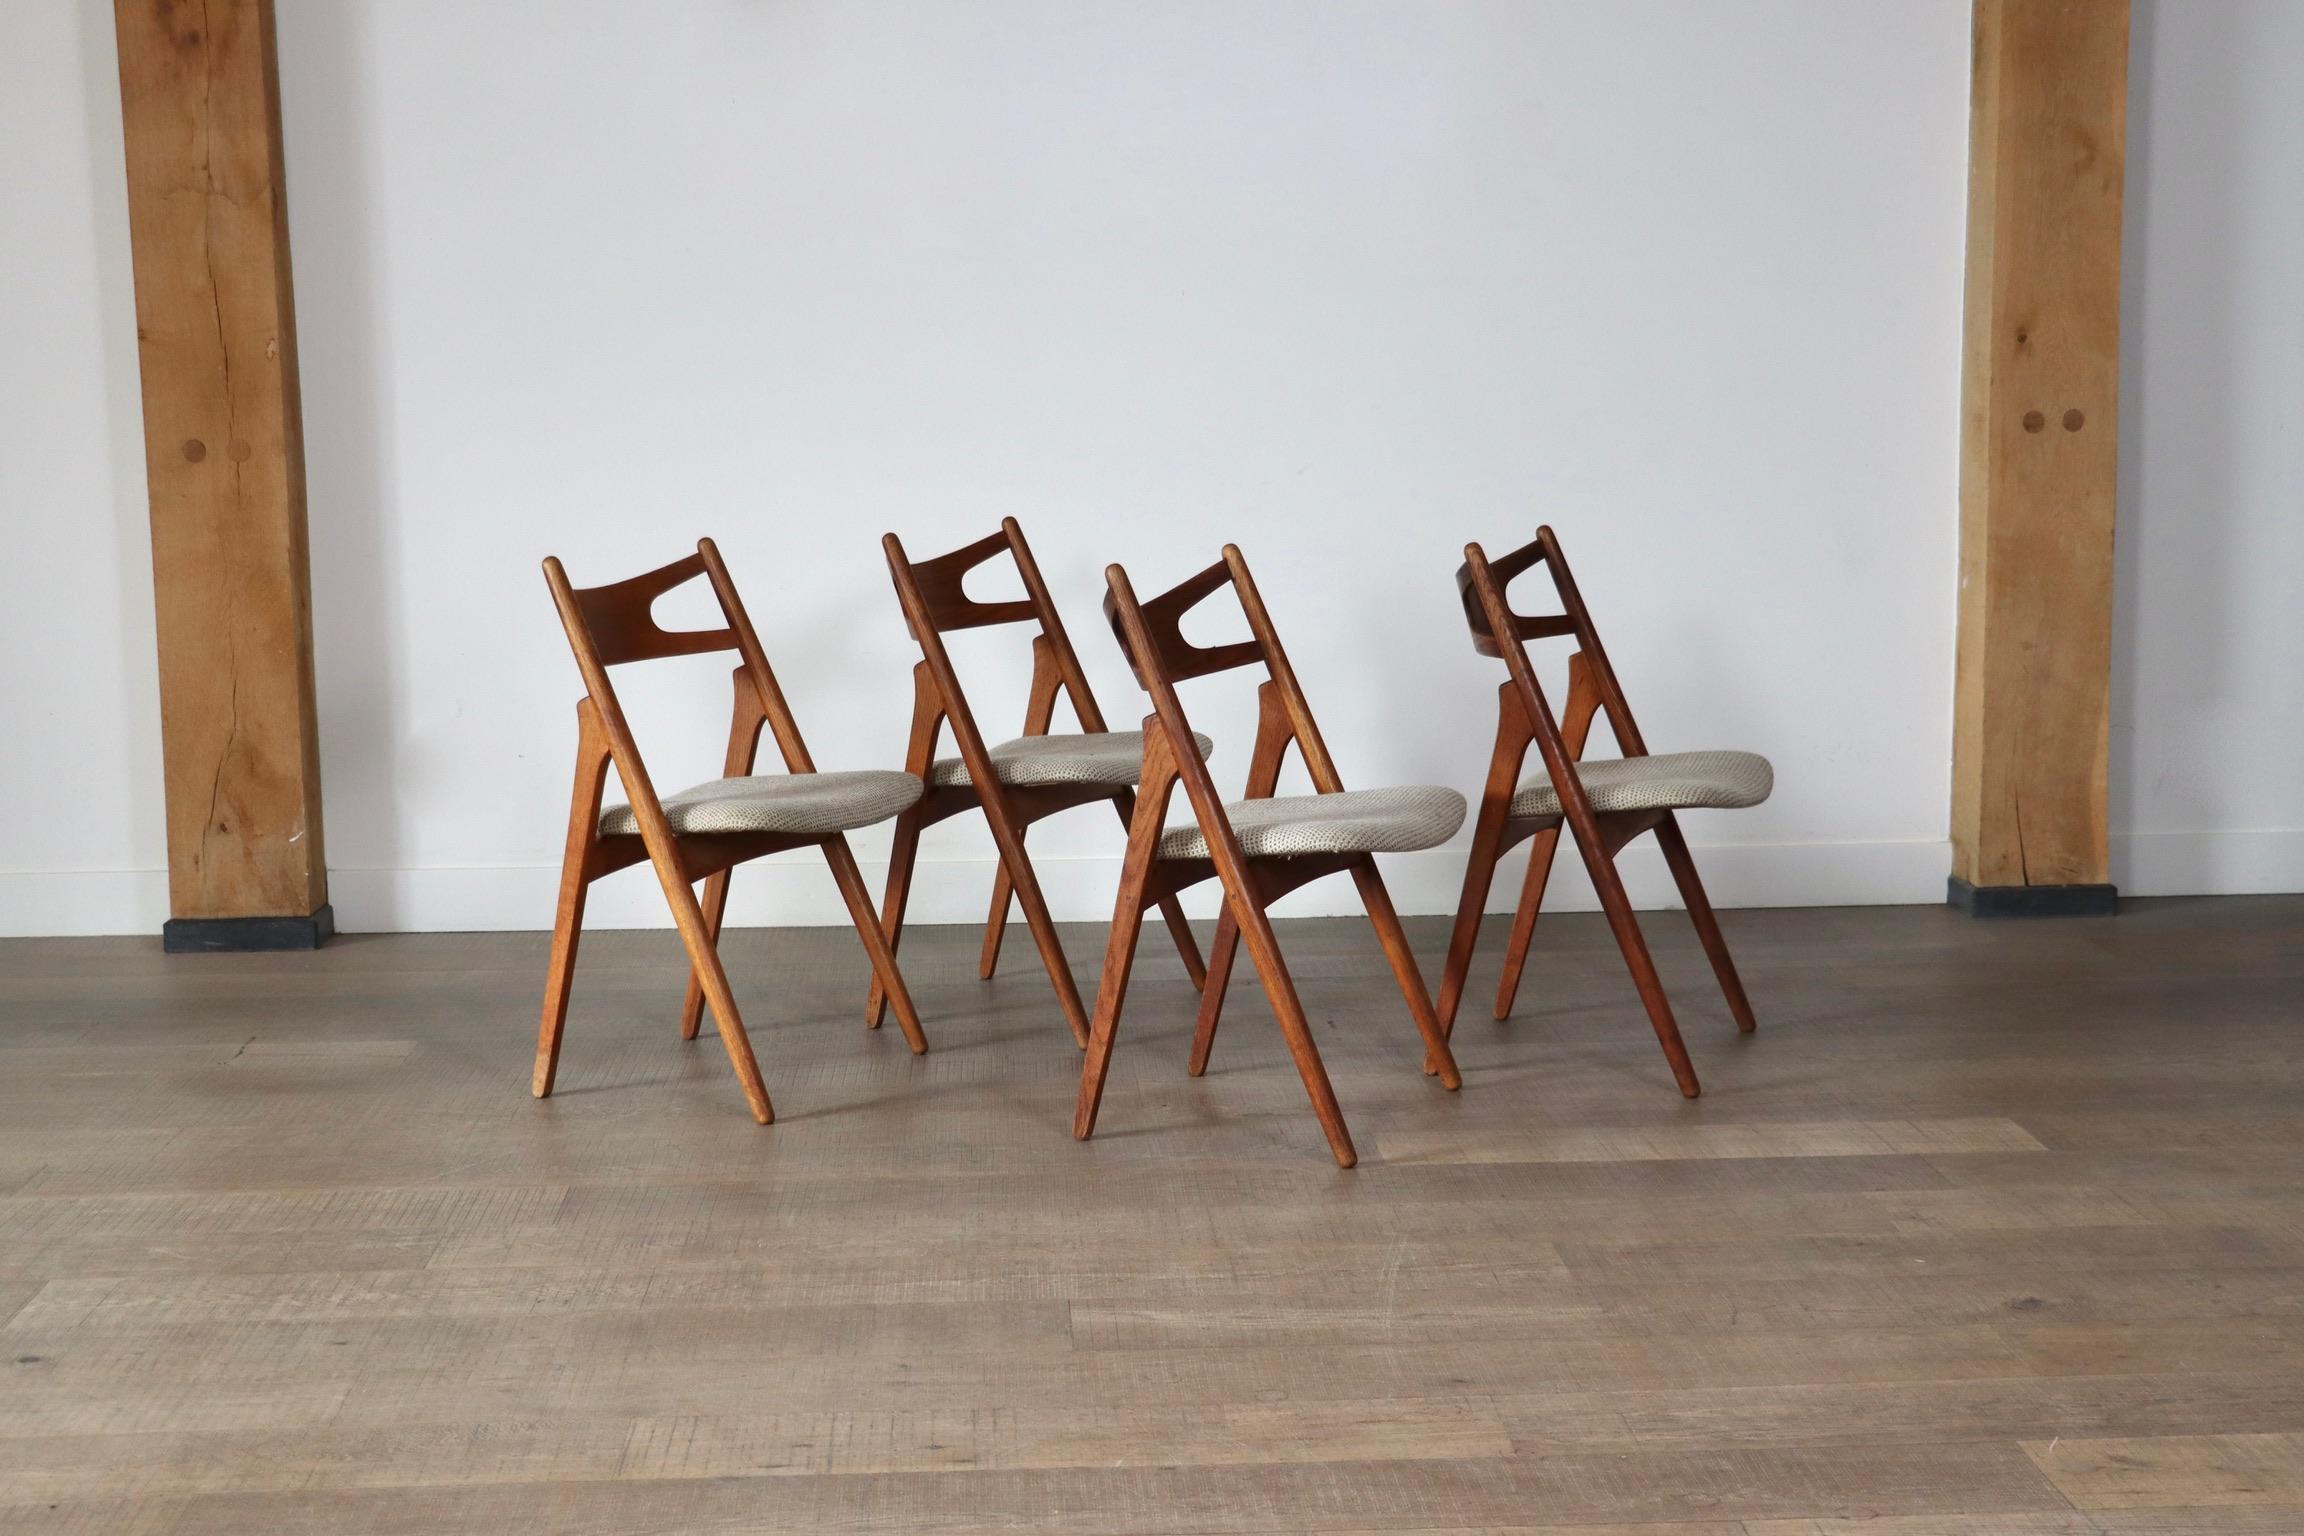 Nice set of 4 iconic model CH29 dining chairs designed by Hans J. Wegner and manufactured by Carl Hansen & Søn, Denmark 1952. This design classic is also called “Sawbuck chair” because the model resembles a sawhorse. The sawhorse was traditionally